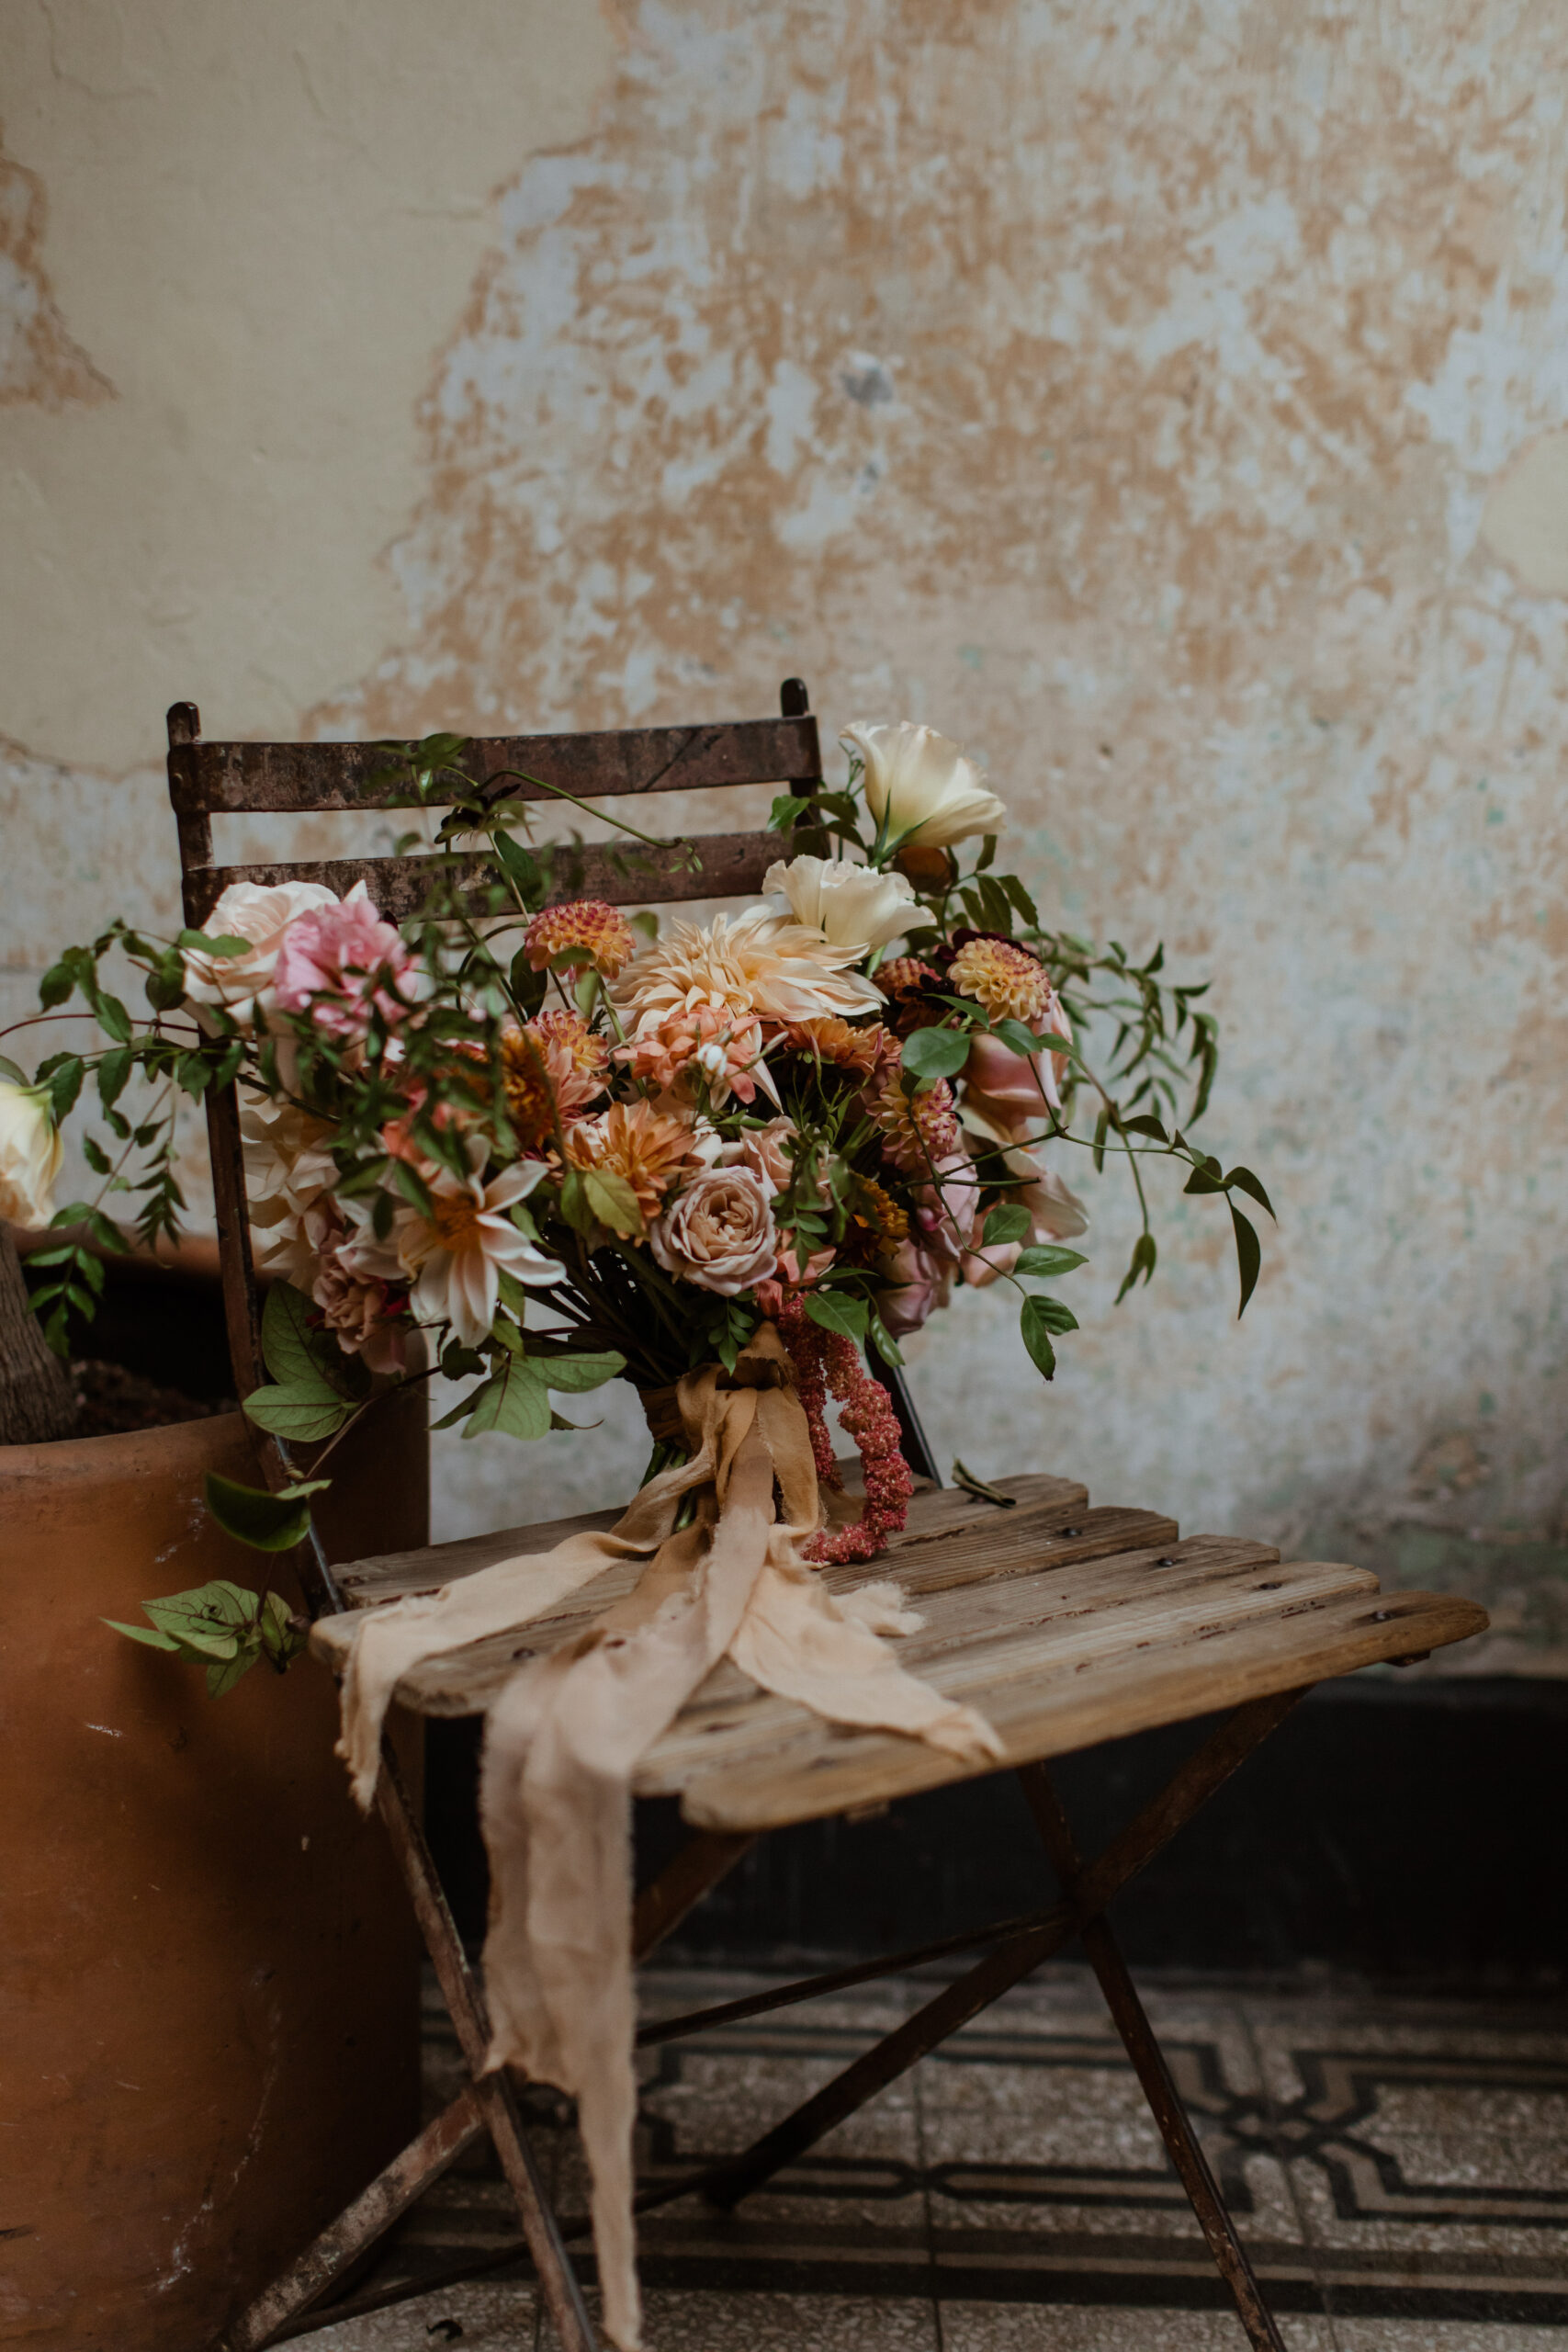 Wedding florals sit on a wooden chair for decoration